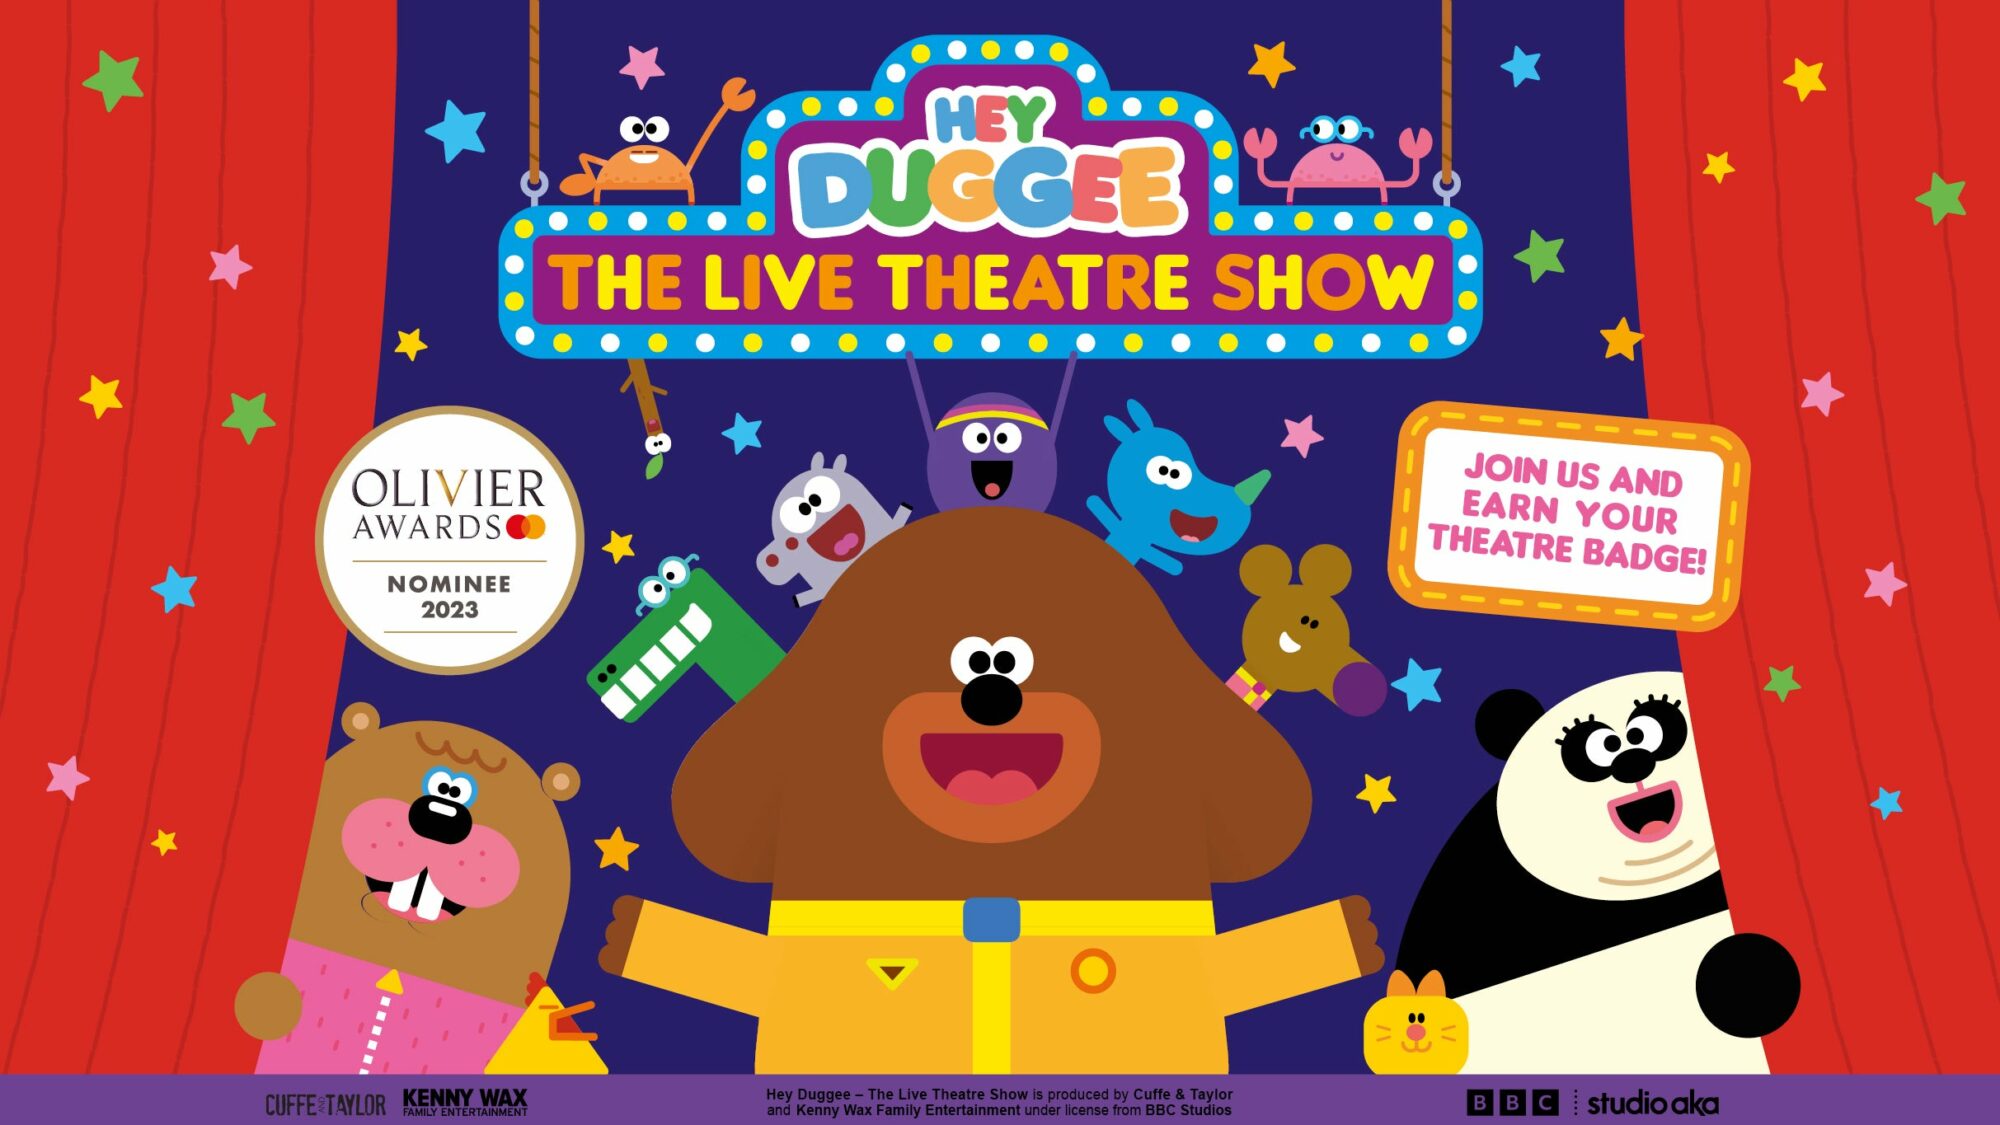 Image name HEY DUGGEE The Live Theatre Show at Leeds Grand Theatre Leeds the 1 image from the post HEY DUGGEE - The Live Theatre Show at Leeds Grand Theatre, Leeds in Yorkshire.com.